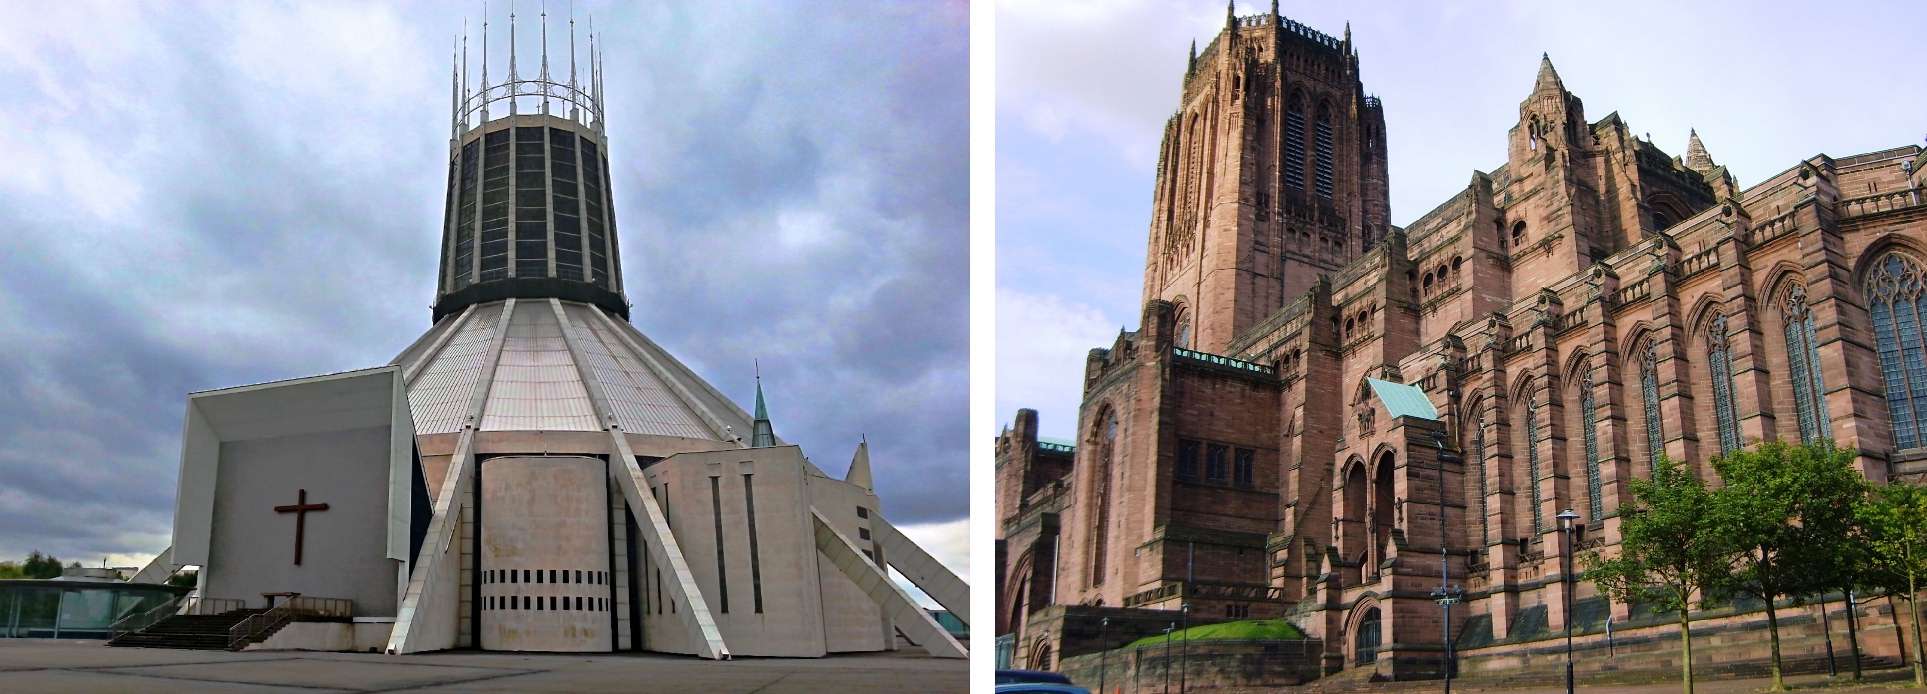 liverpool's two cathedrals